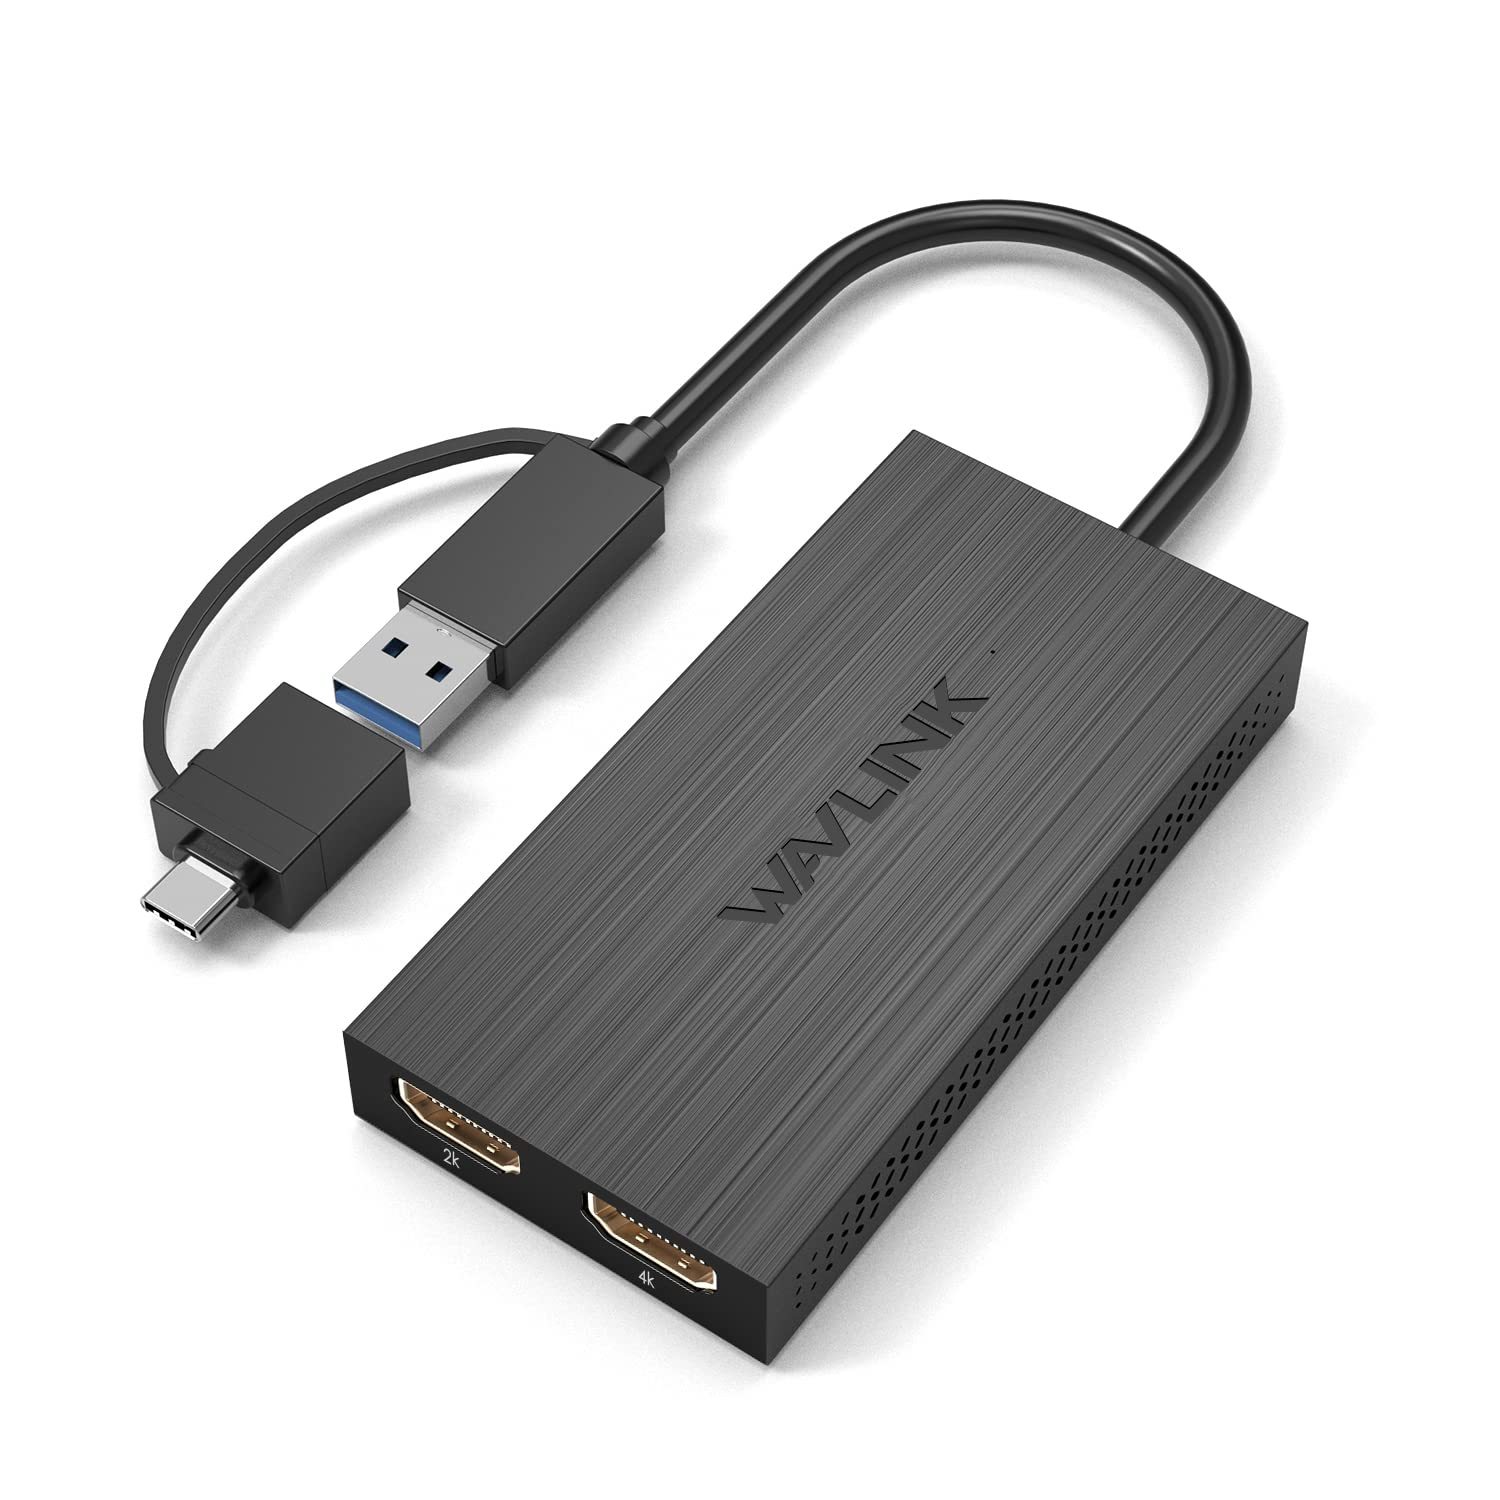 Primary image for WAVLINK USB 3.0 to Dual HDMI UHD Universal Video Adapter - Supports 6 Monitor Di